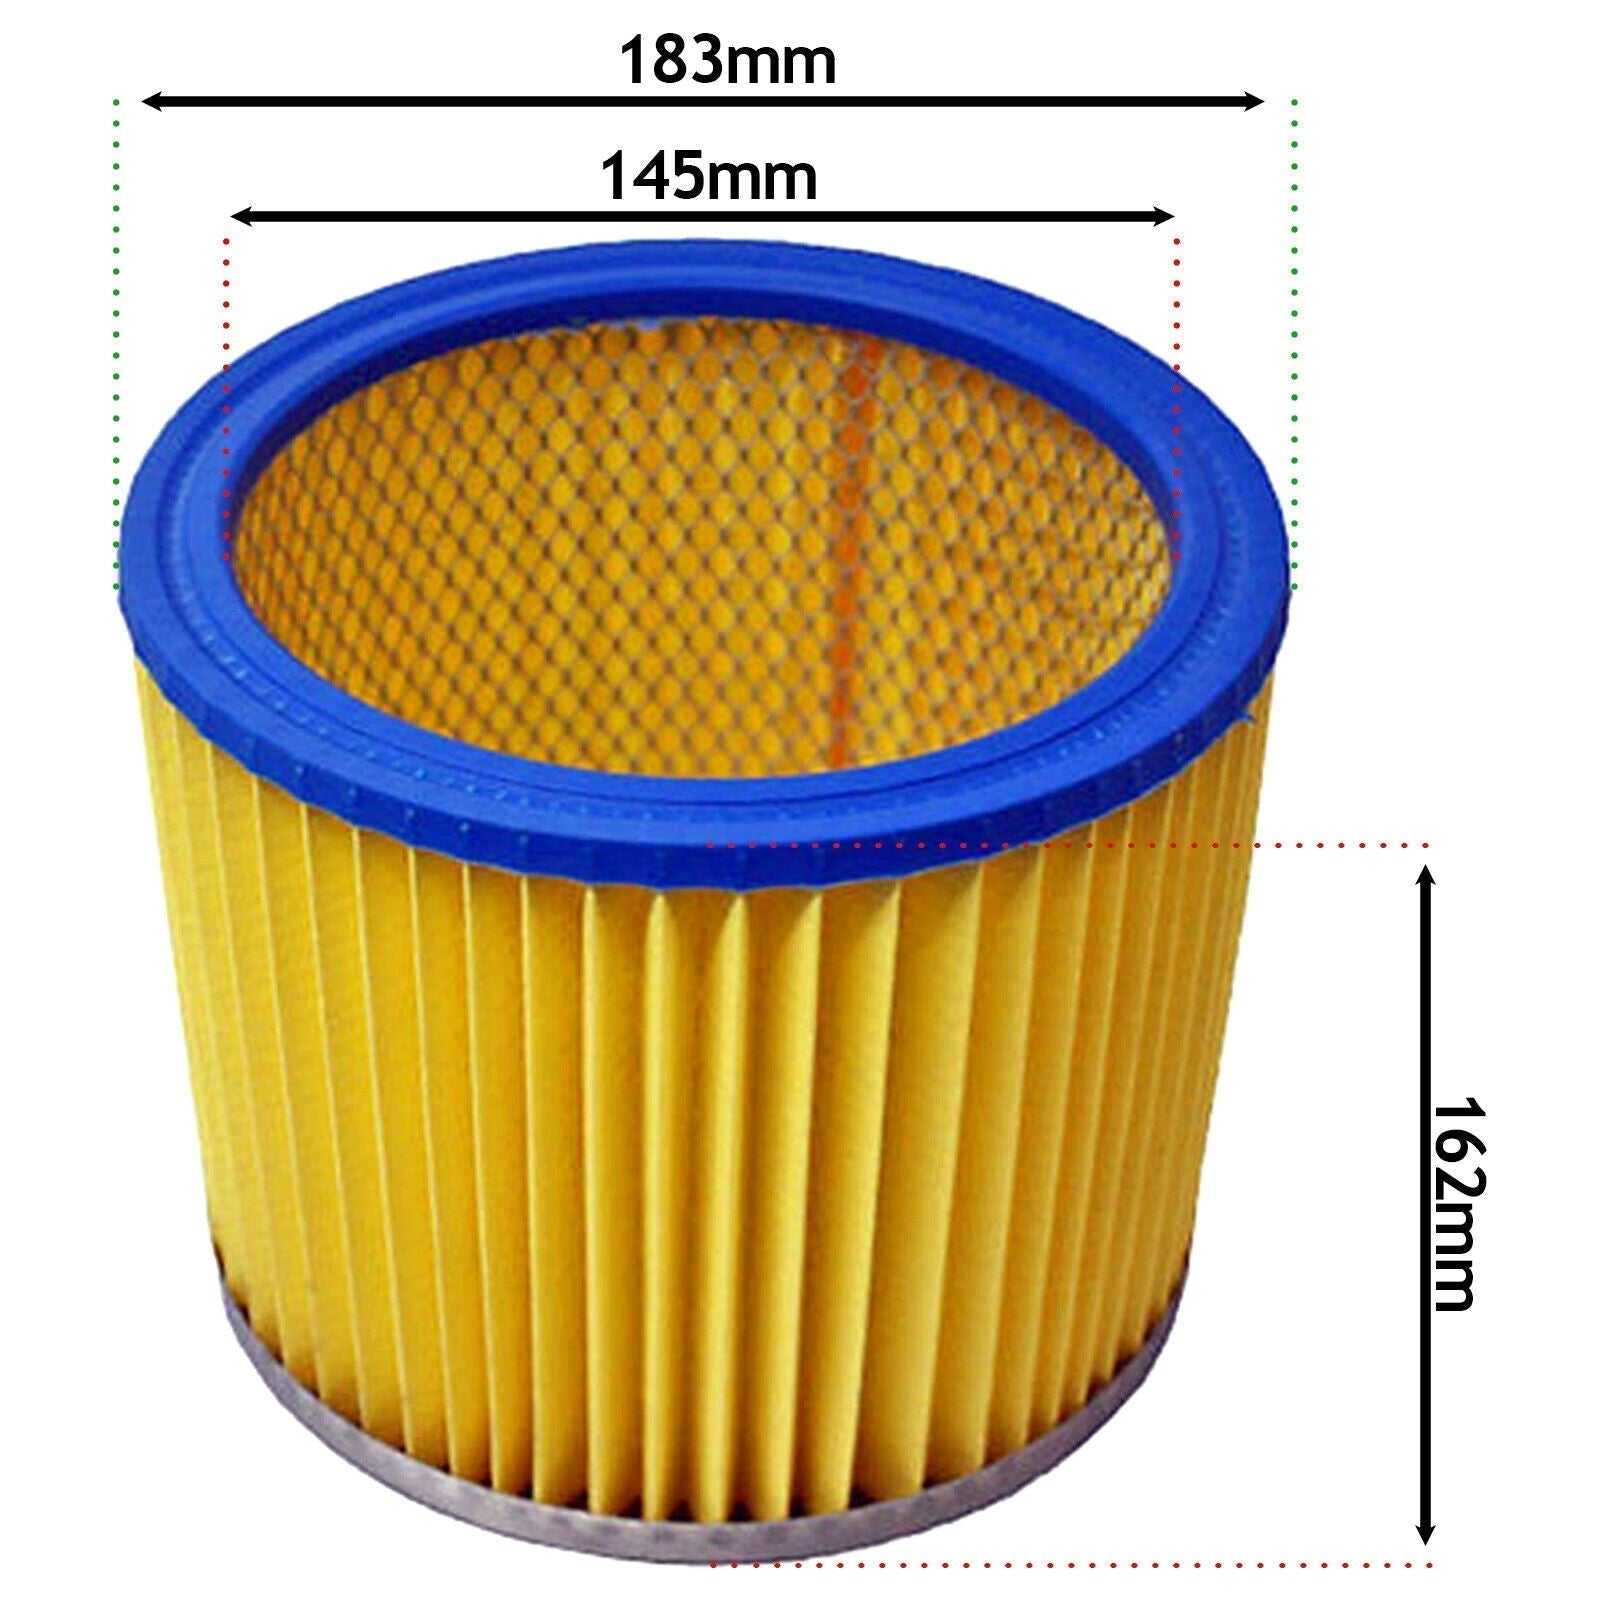 Filter Cartridge compatible with TITAN Wet & Dry Vacuum Cleaners